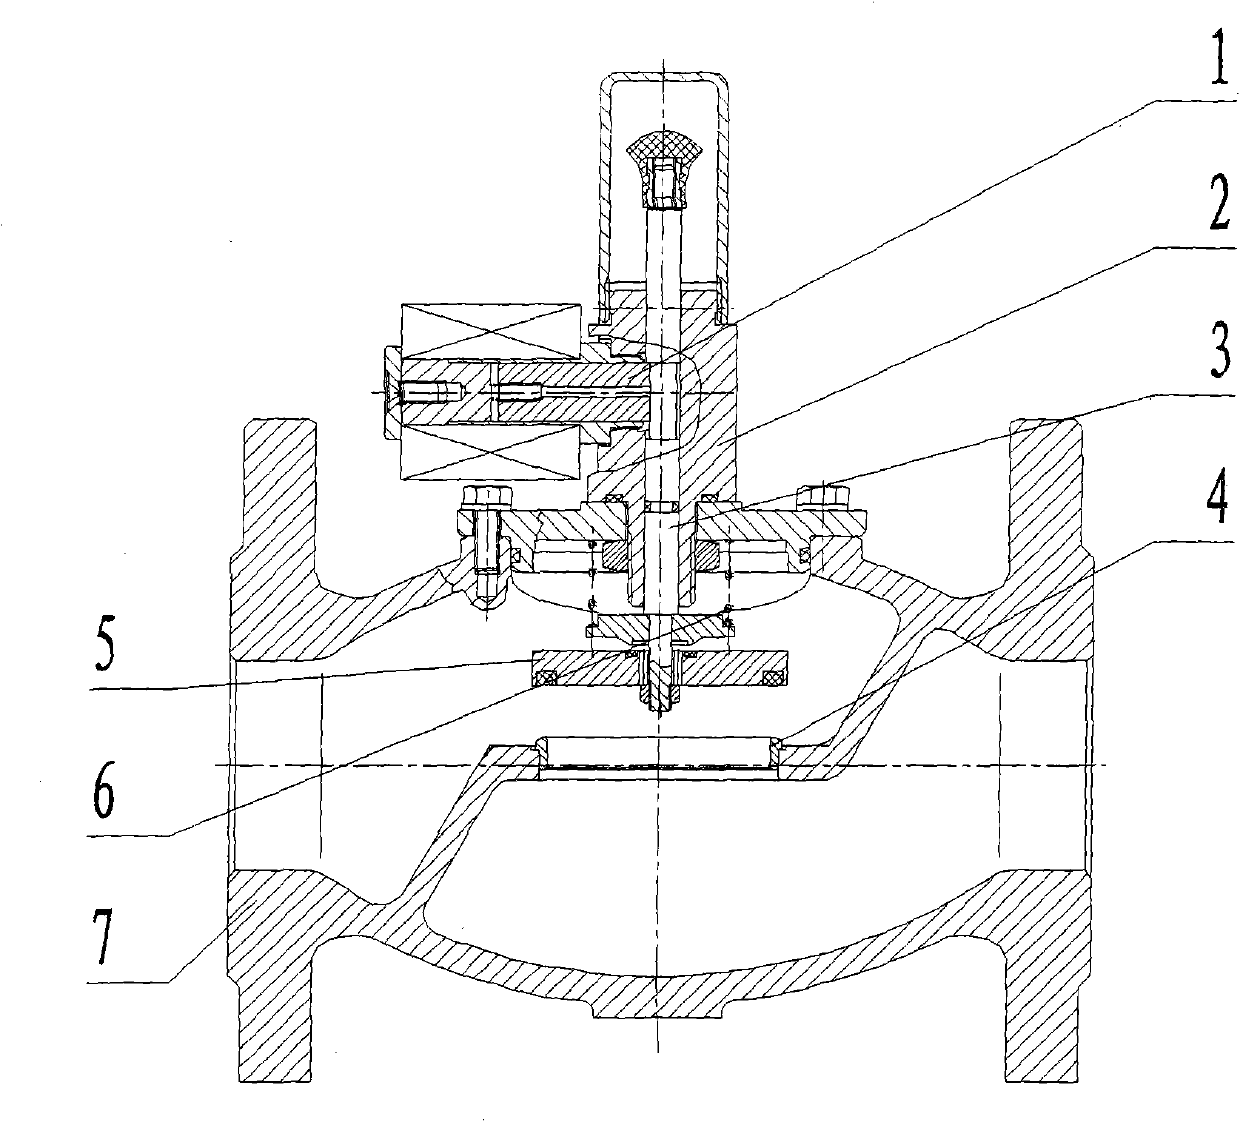 Reverse sealing structure of emergency cut-off valve for gas